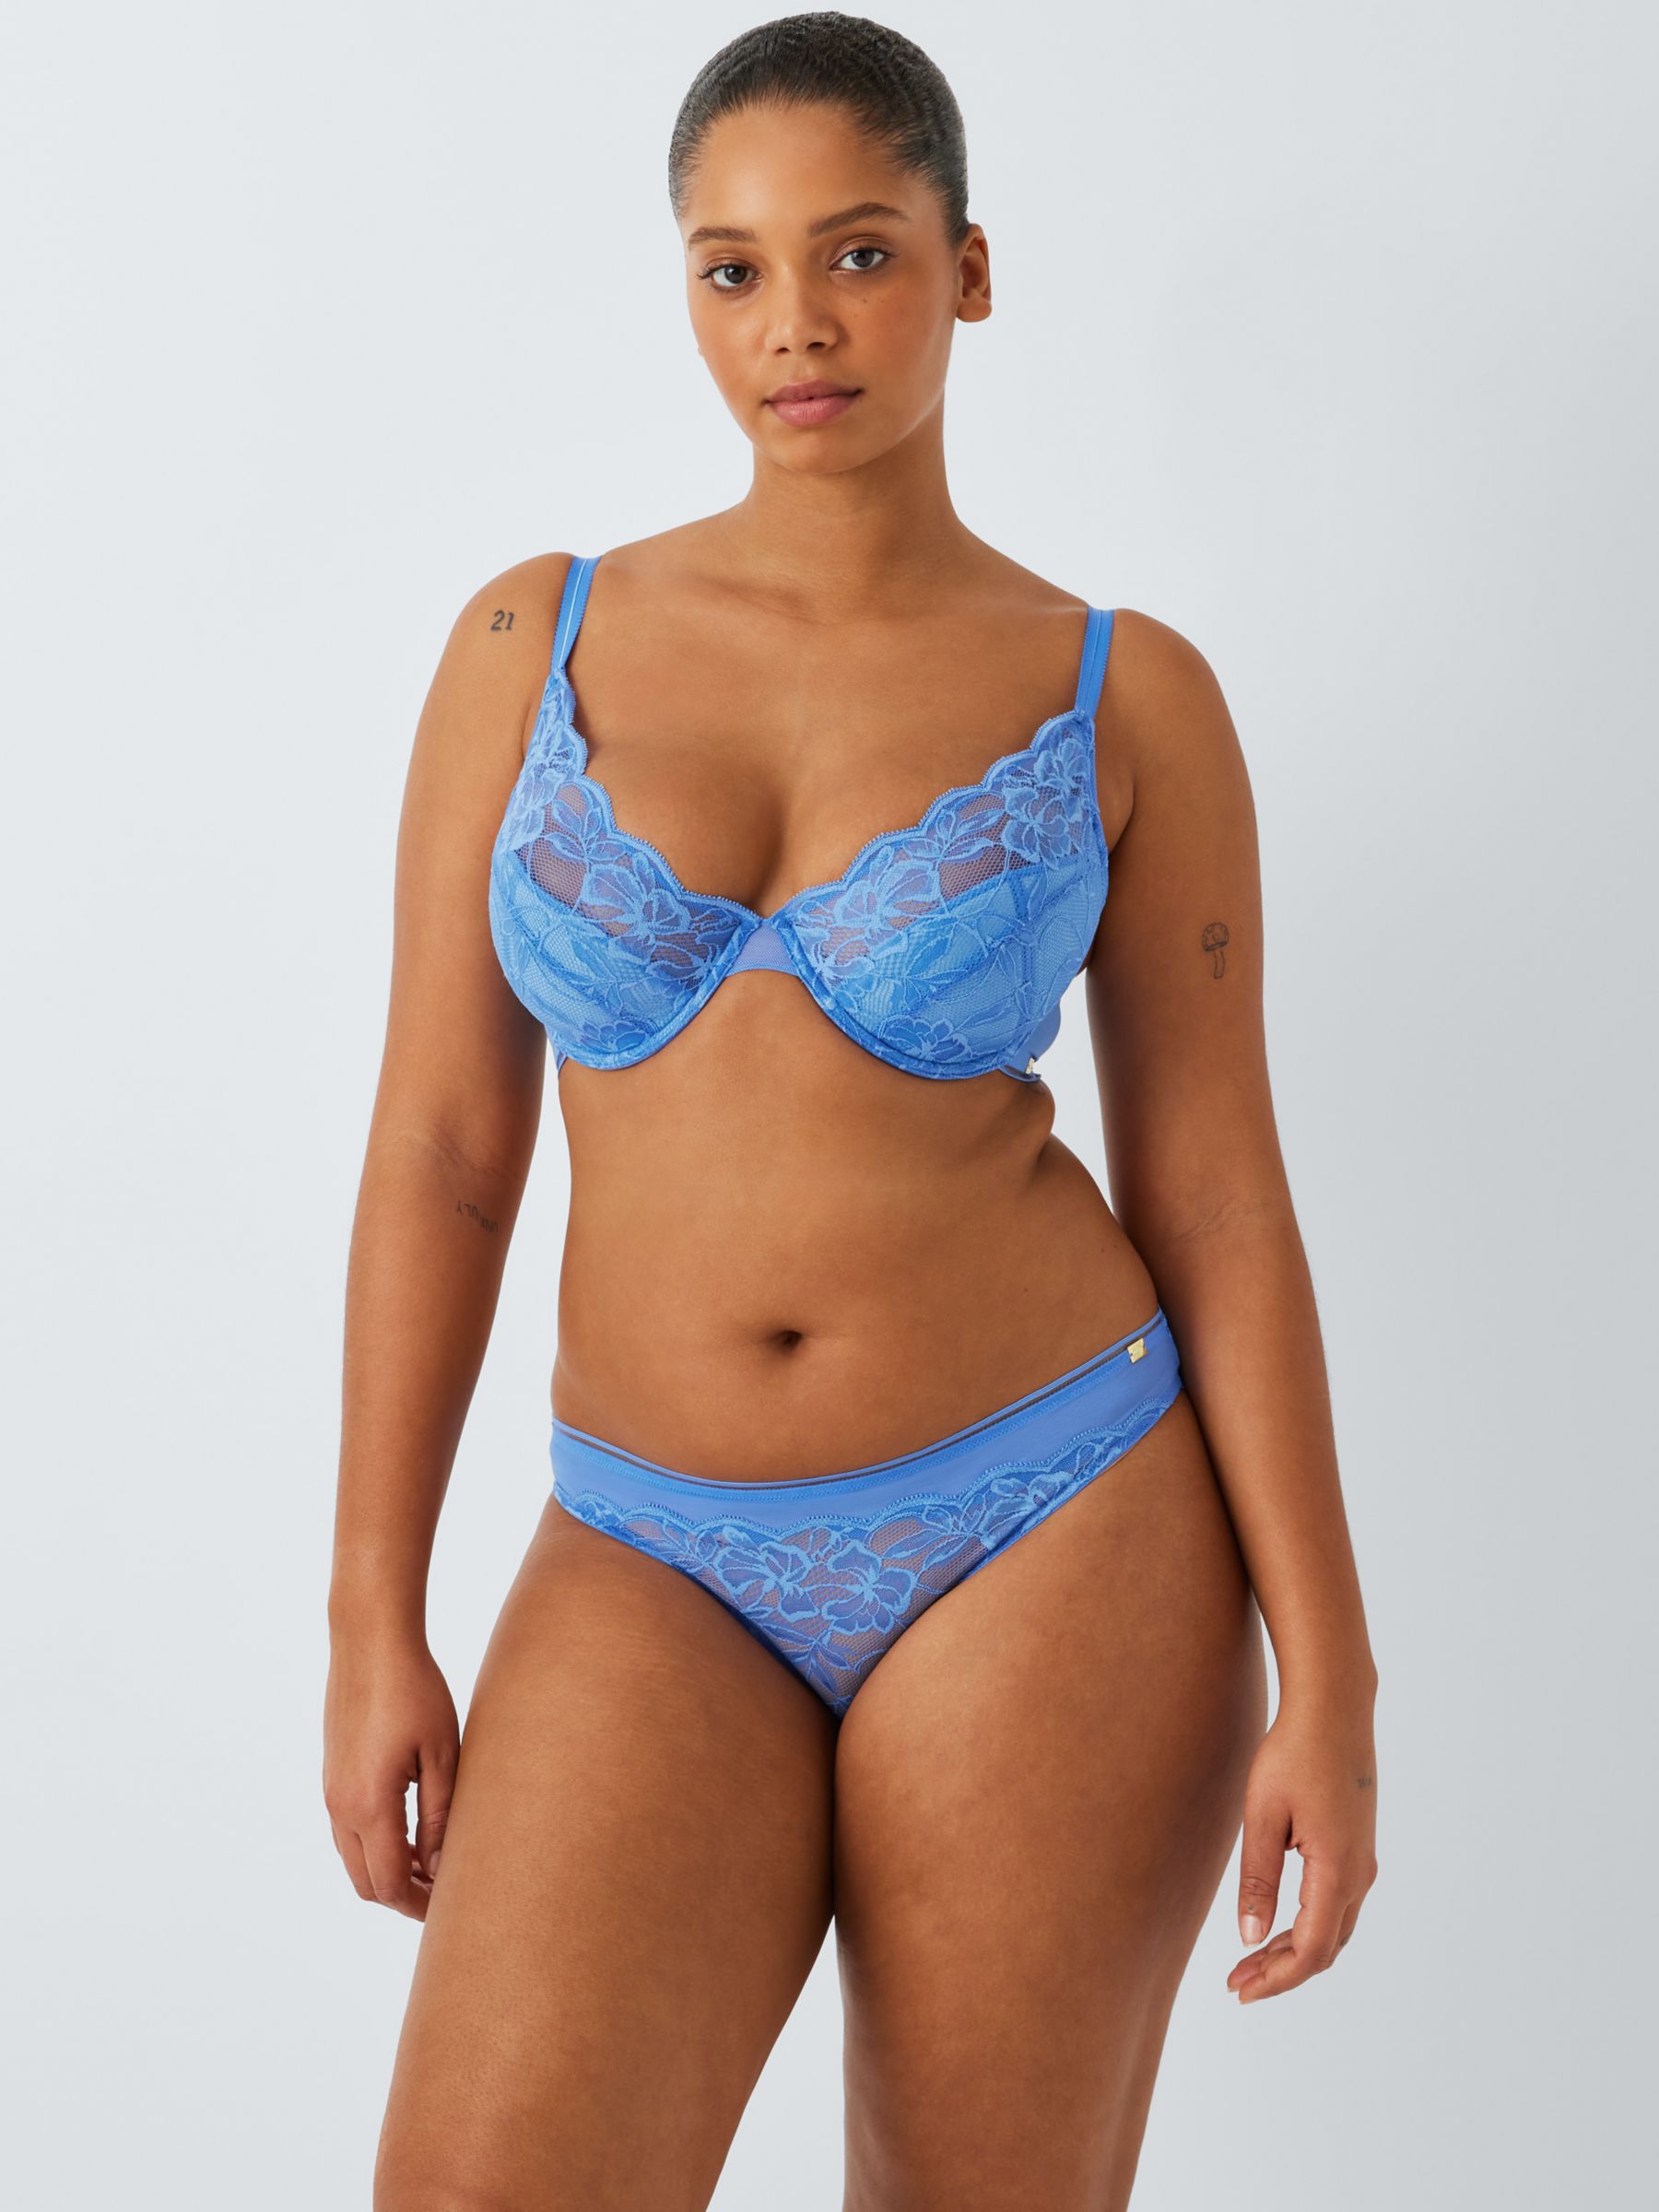 AND/OR Wren Lace Underwired Plunge Bra, B-F Cup Sizes, Cornflower Blue, 32B